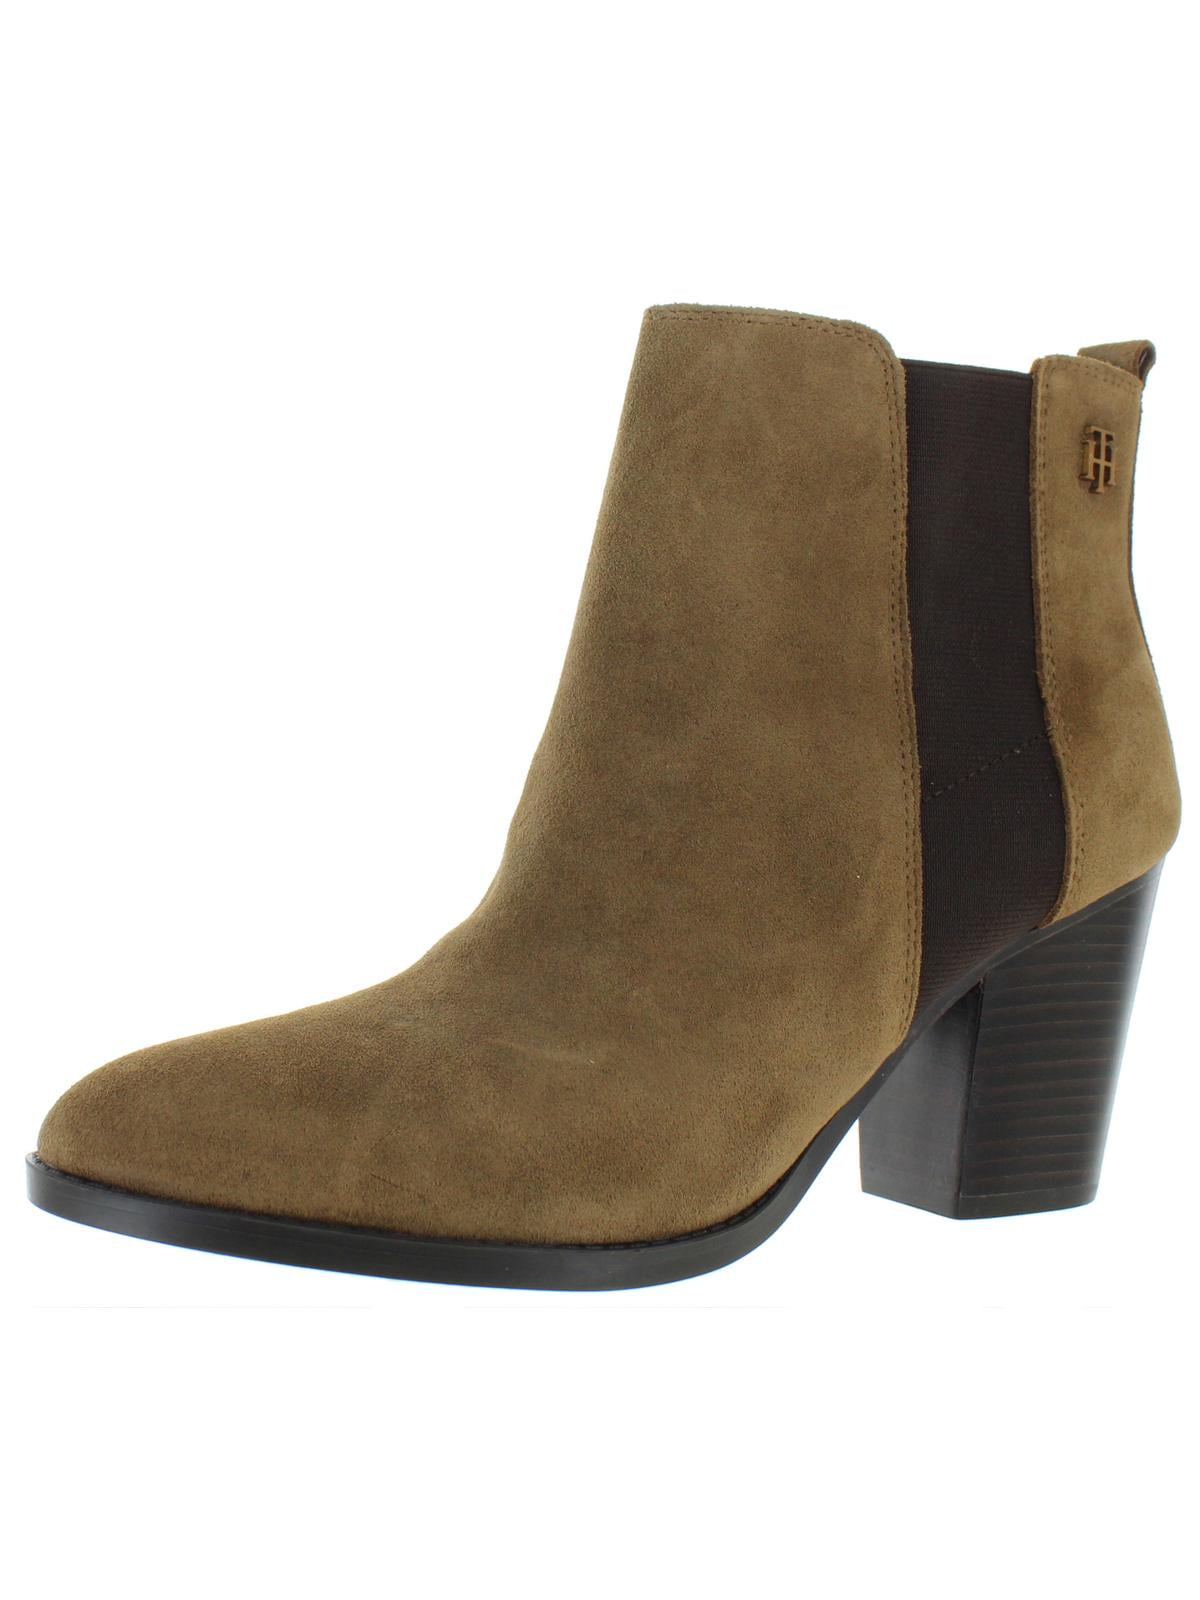 tommy hilfiger suede booties